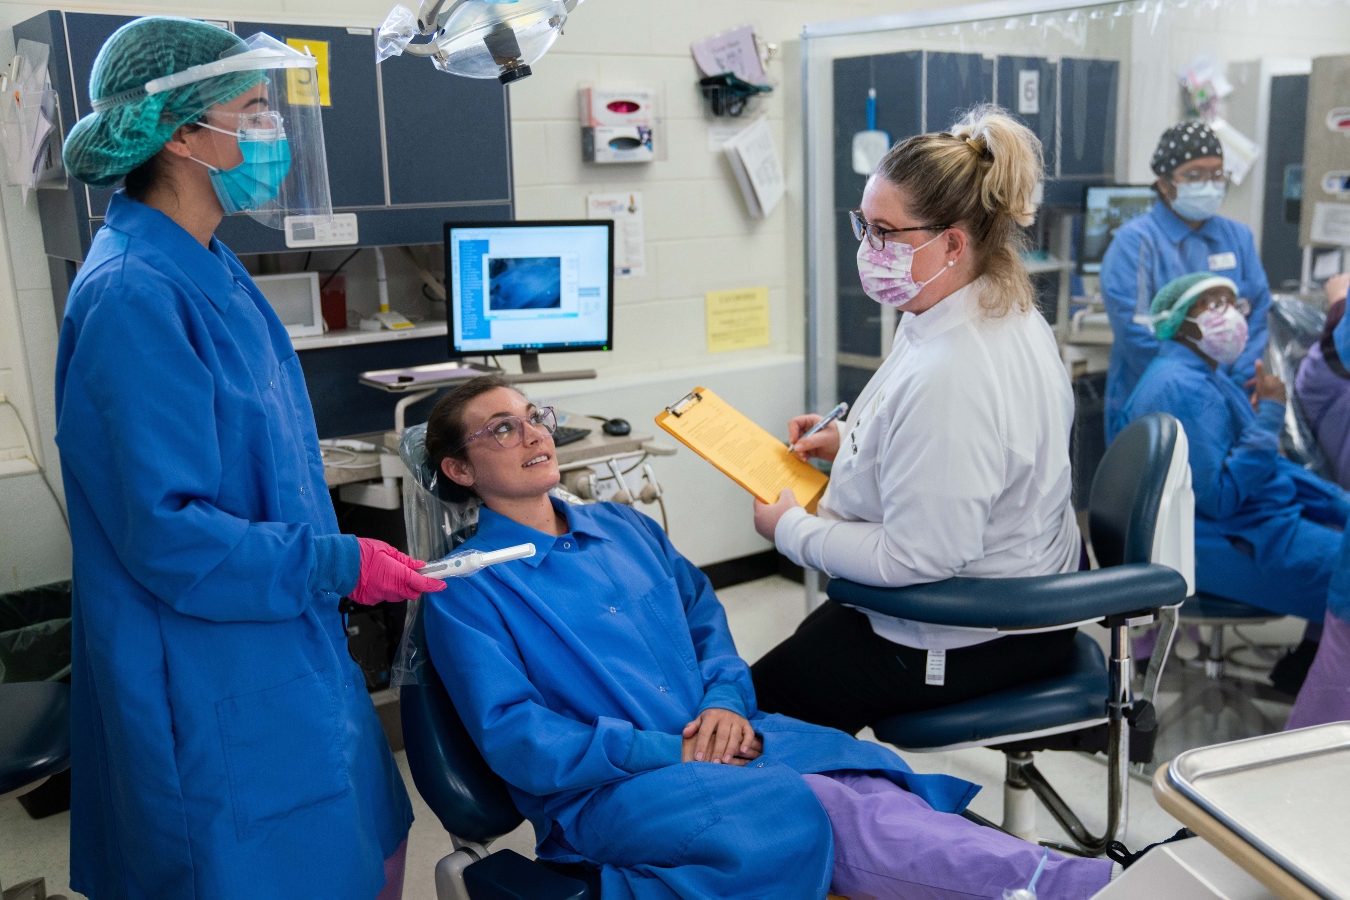 Real-world dental hygiene training with students actively engaged in a clinical setting on campus.